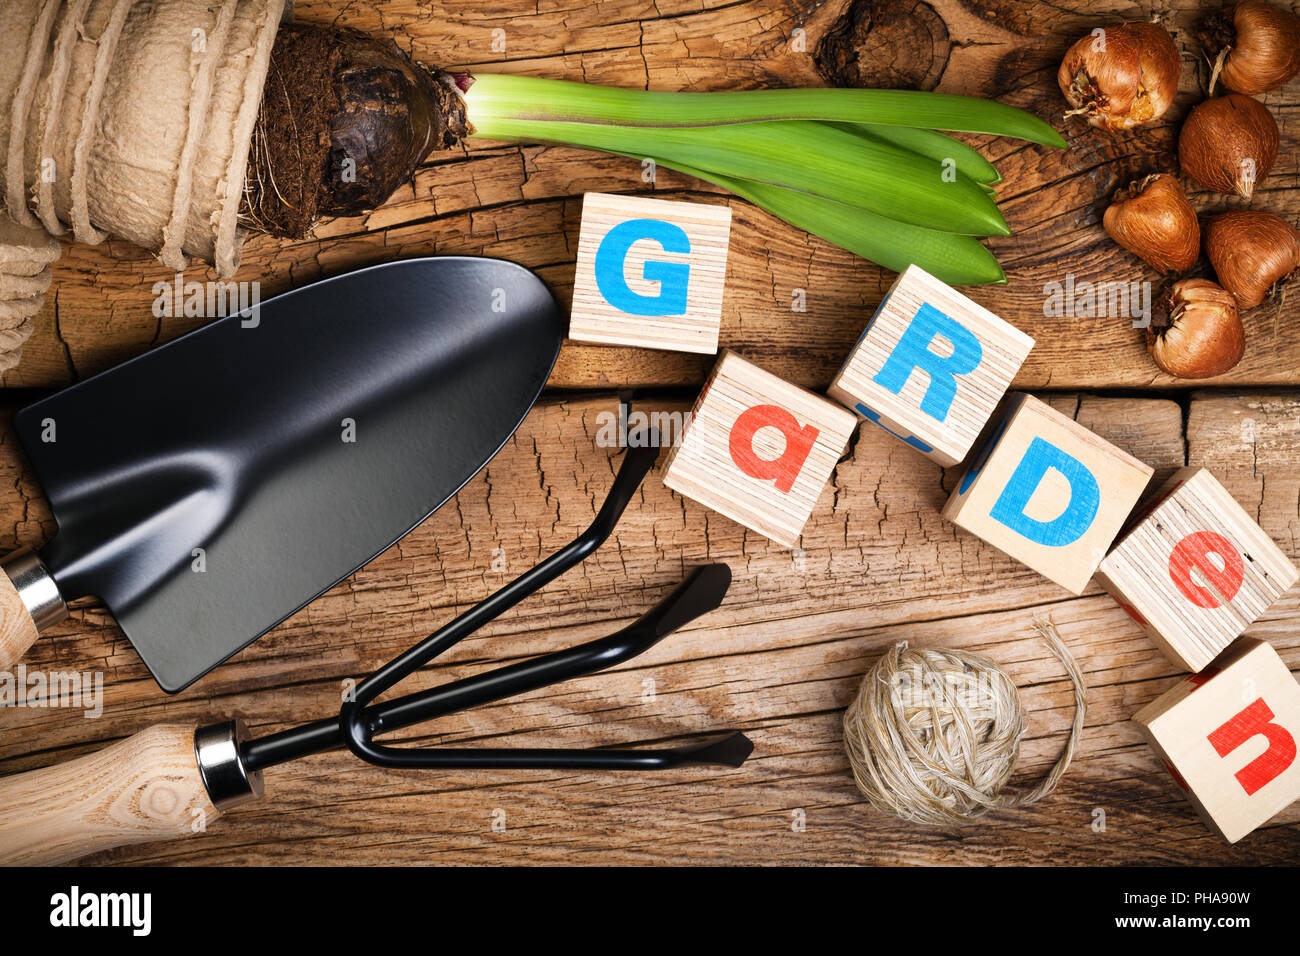 Gardening Tools with Flower and Bulbs on Wood Background Stock Photo